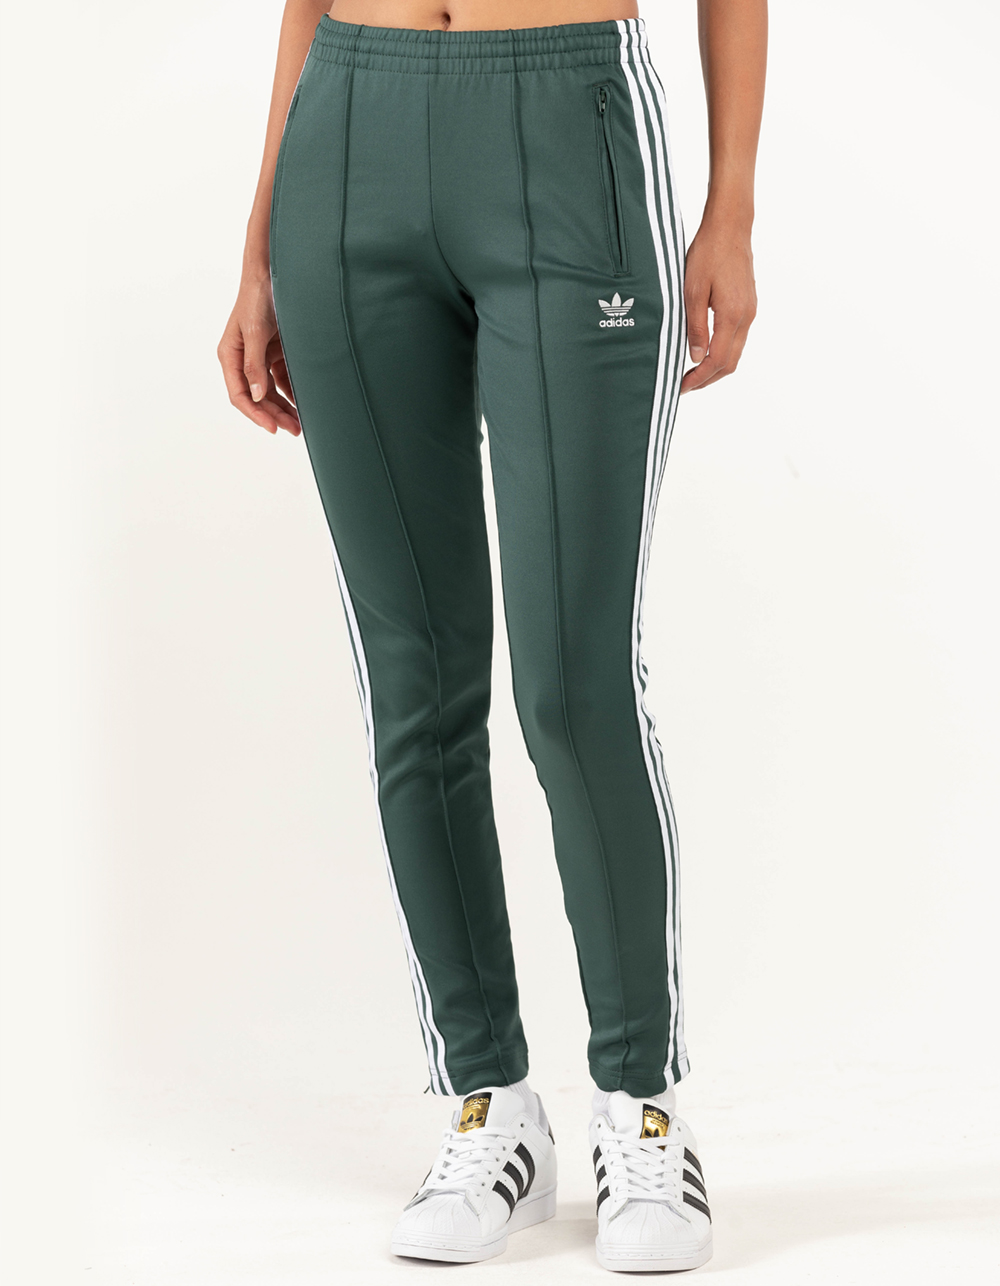 ADIDAS Primeblue SST Womens Track Pants - FOREST | Tillys